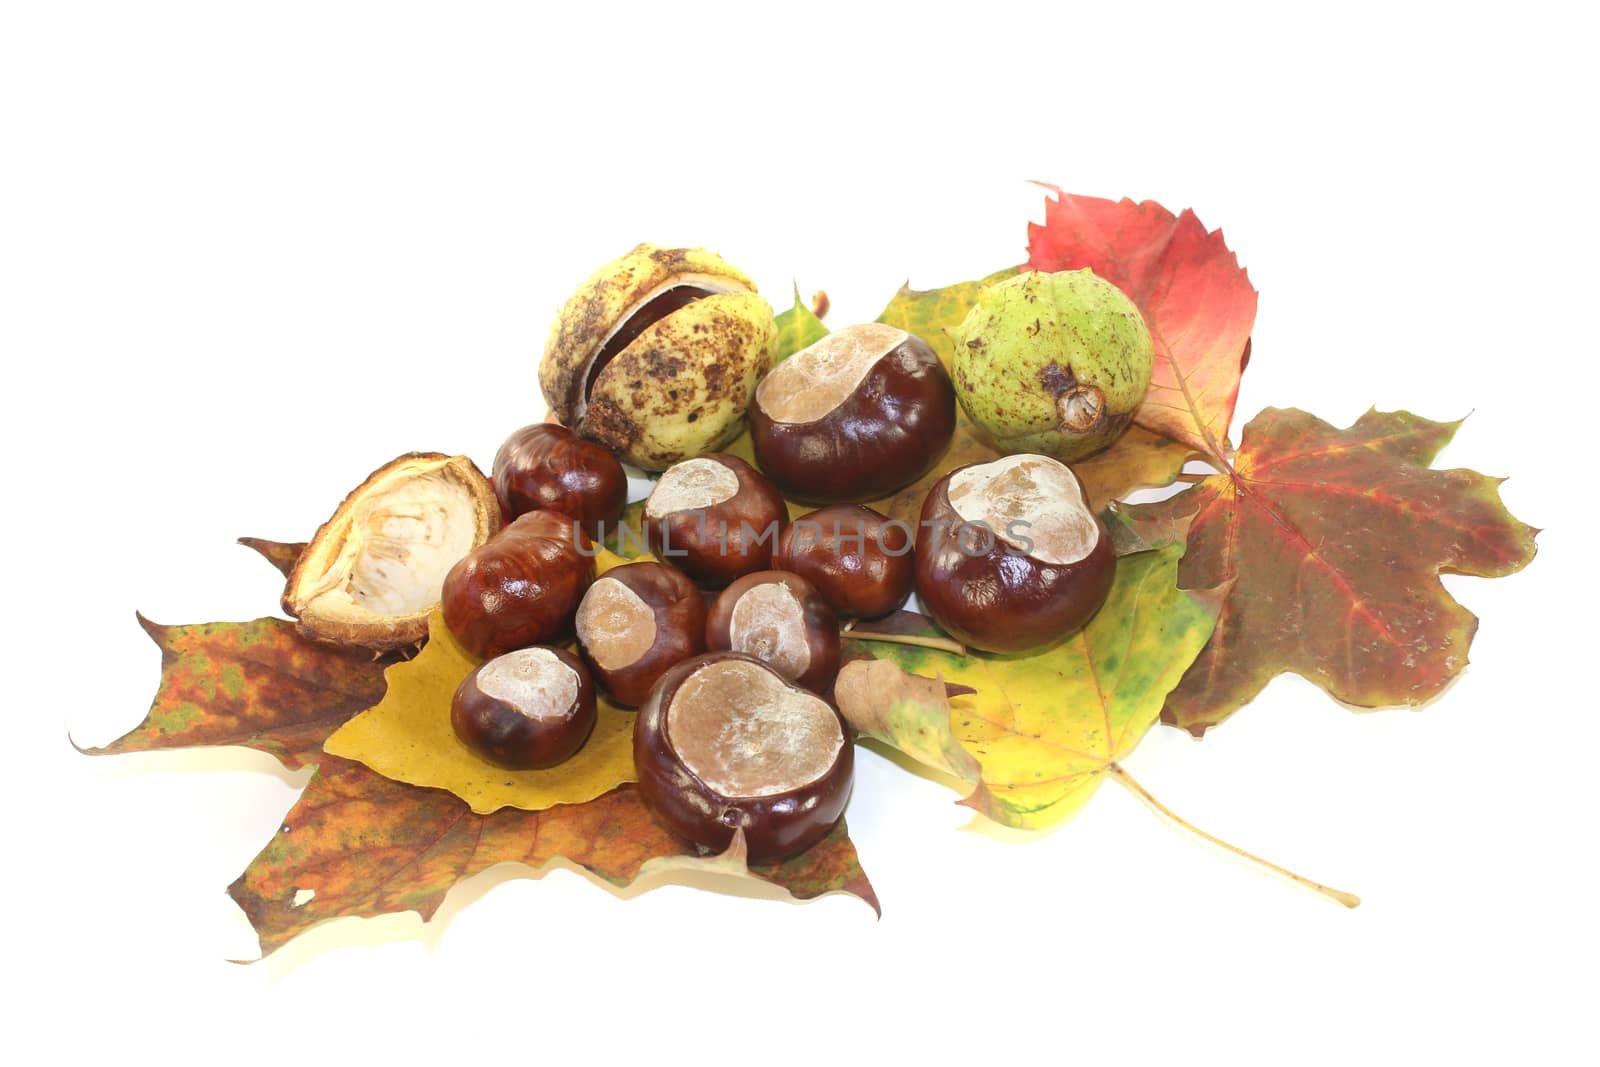 horse chestnuts with autumn leaves on a light background